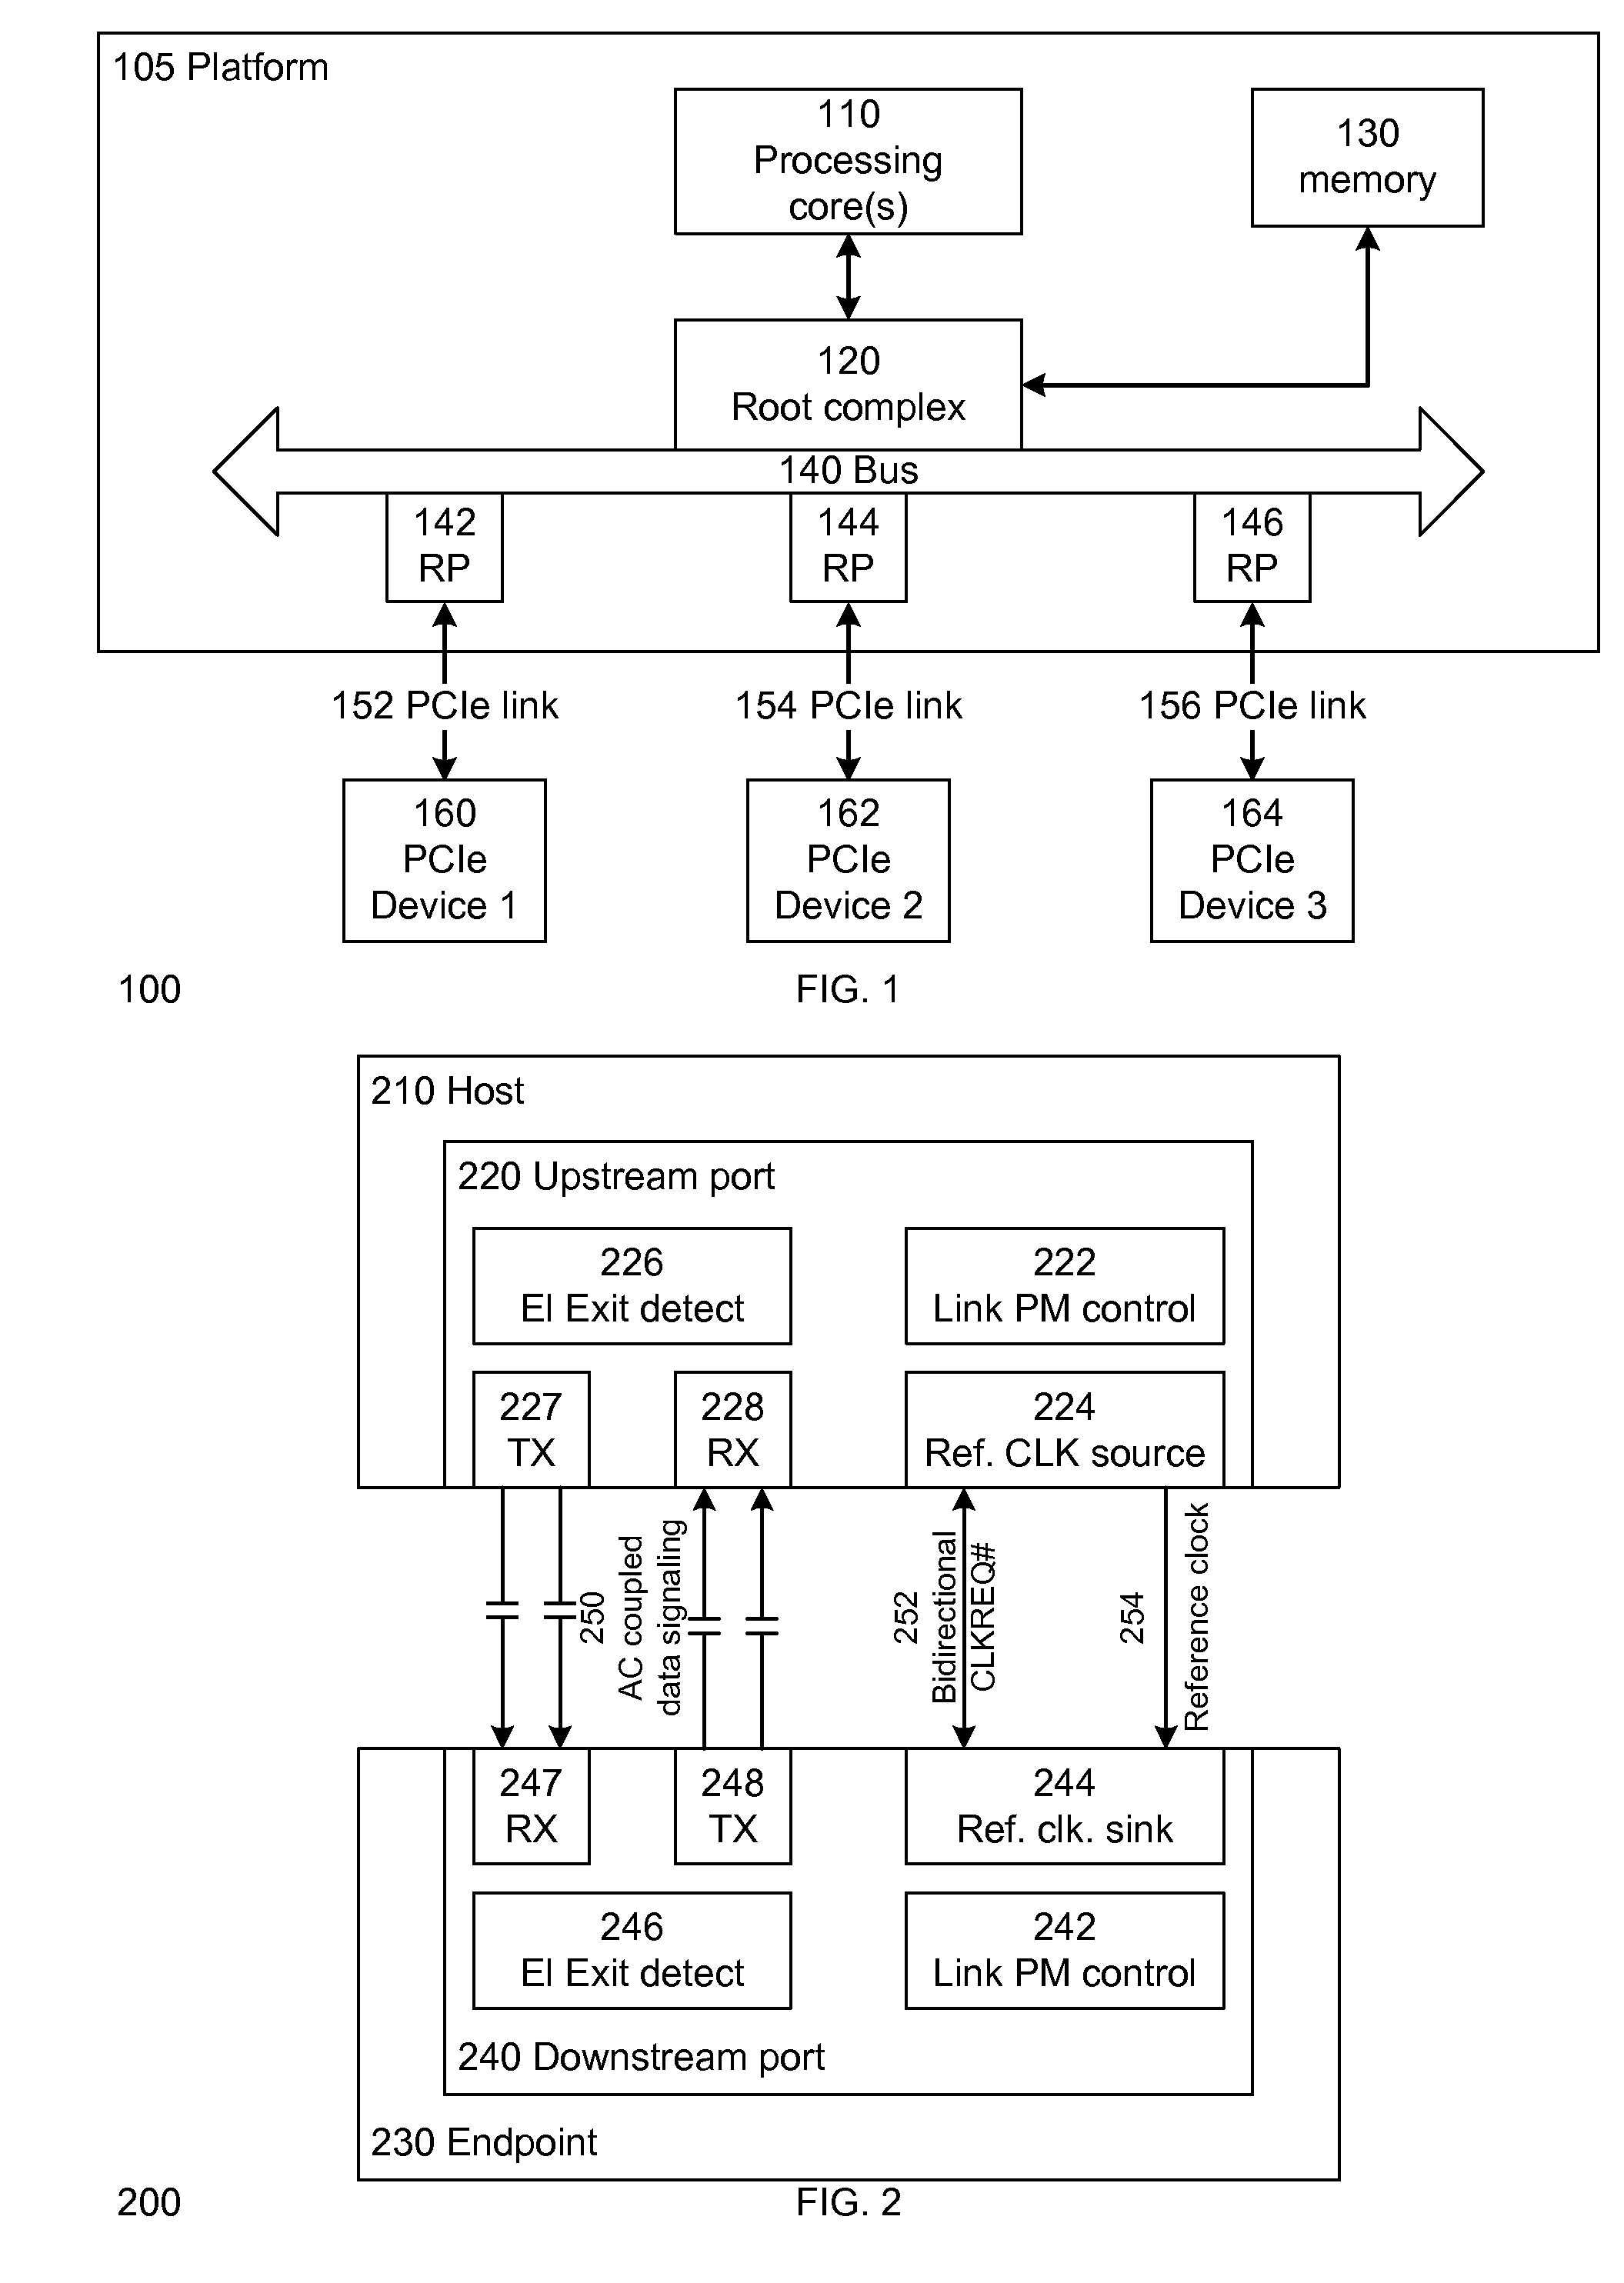 Method and apparatus to reduce idle link power in a platform